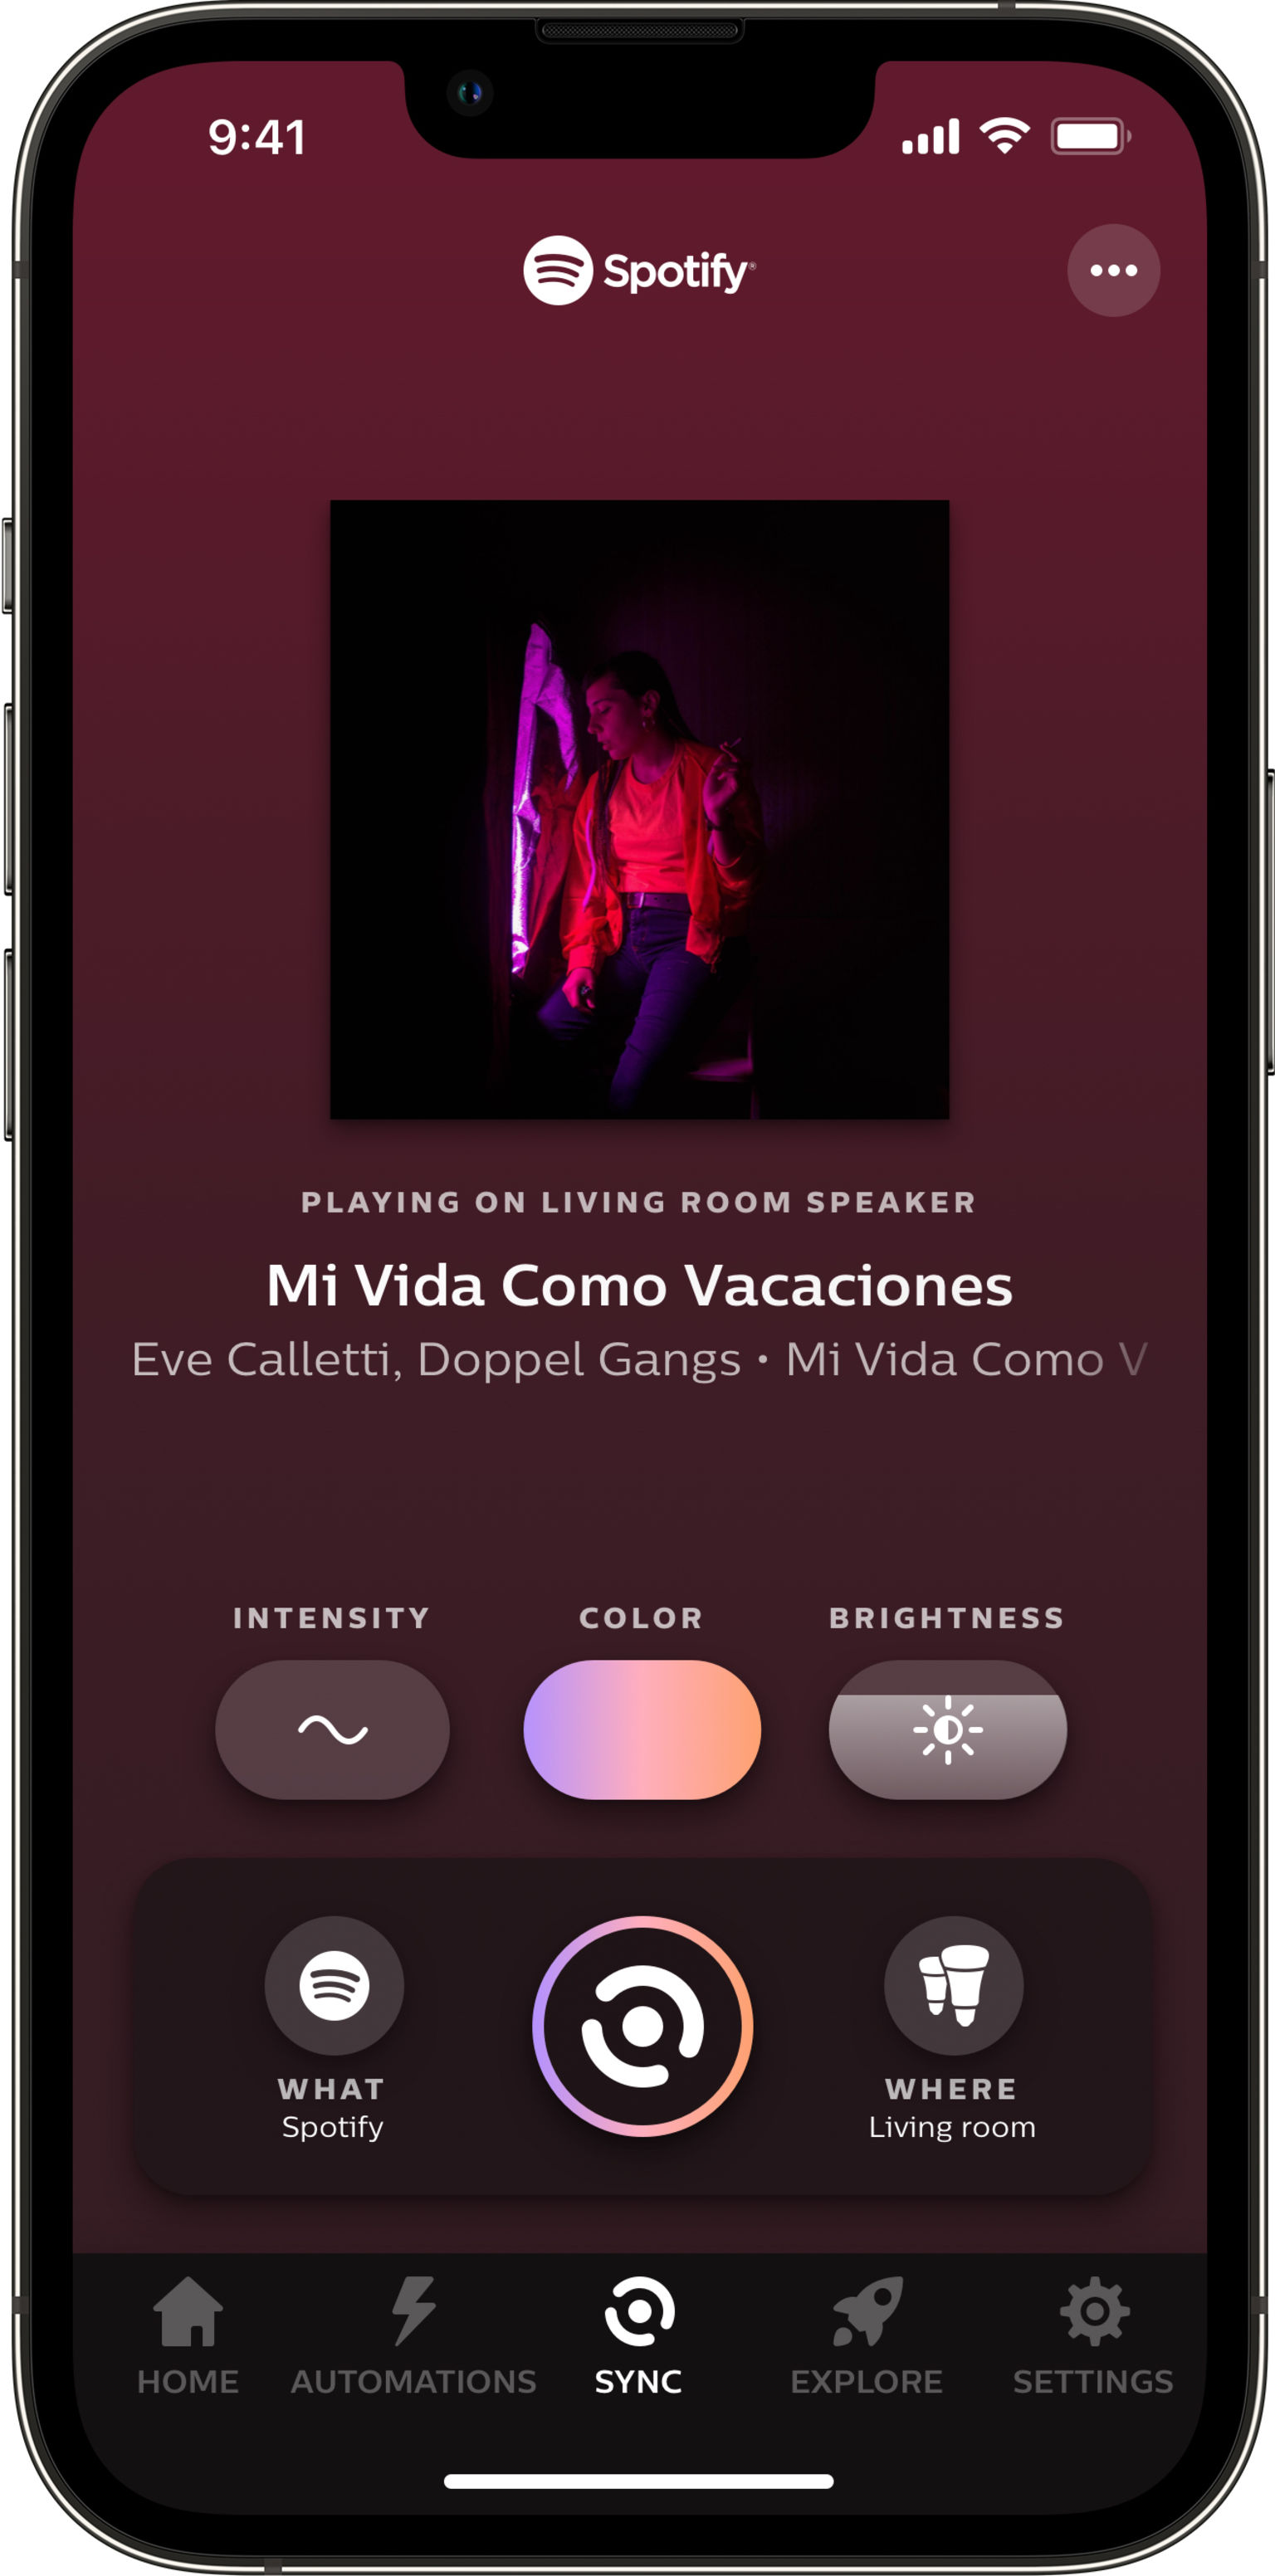 Philips Hue + Spotify